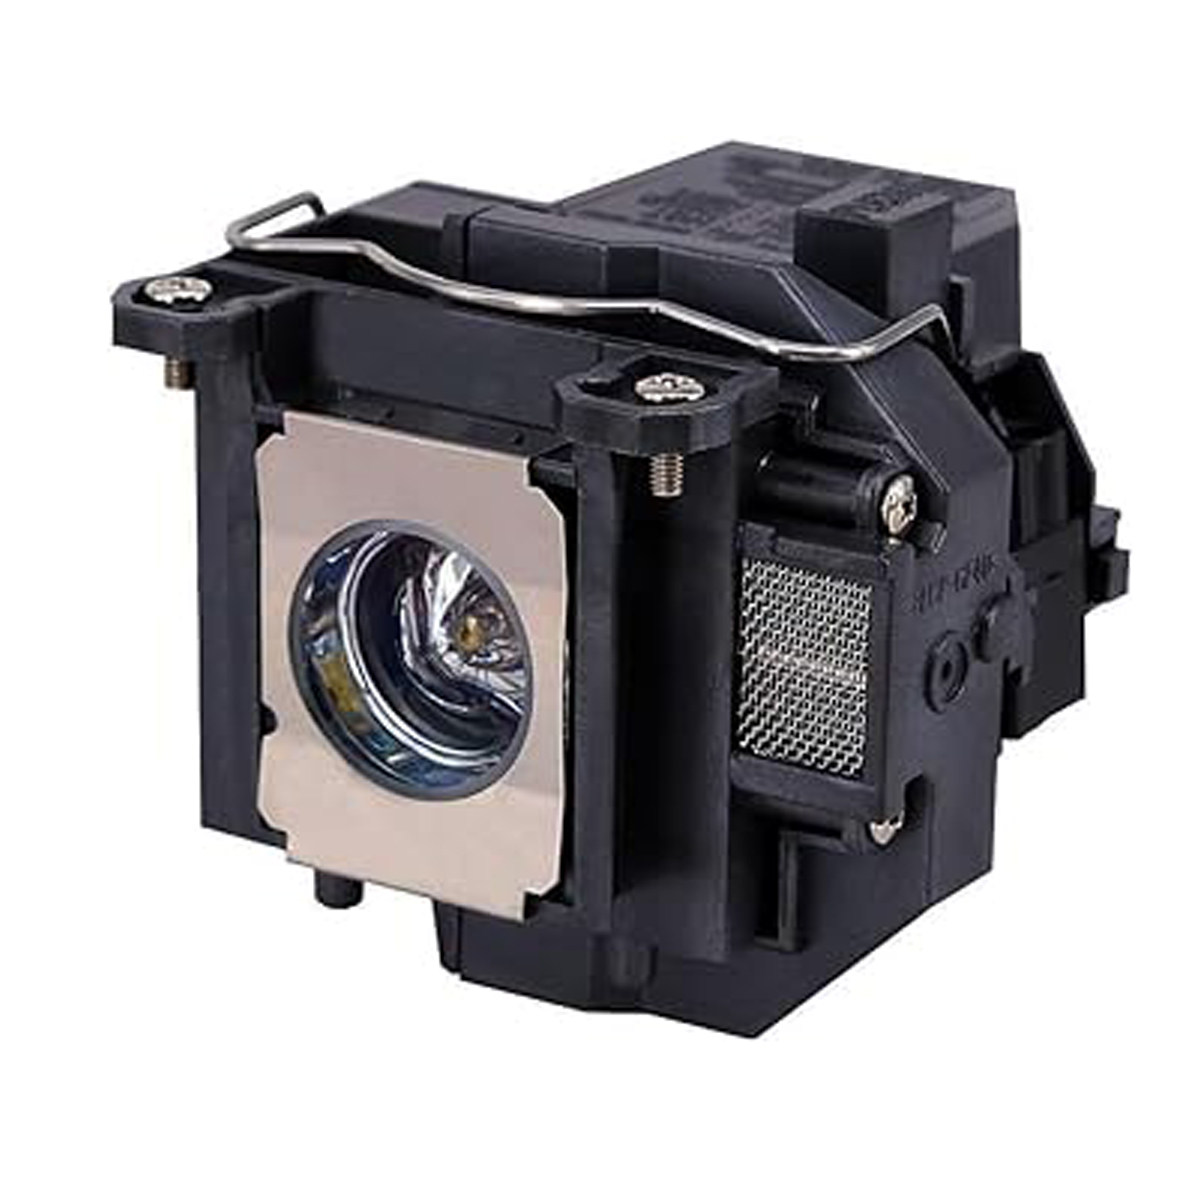 Replacement Projector lamp ELPLP57 For Epson EB-450W EB-450WE EB-450Wi EB-455W EB-455Wi